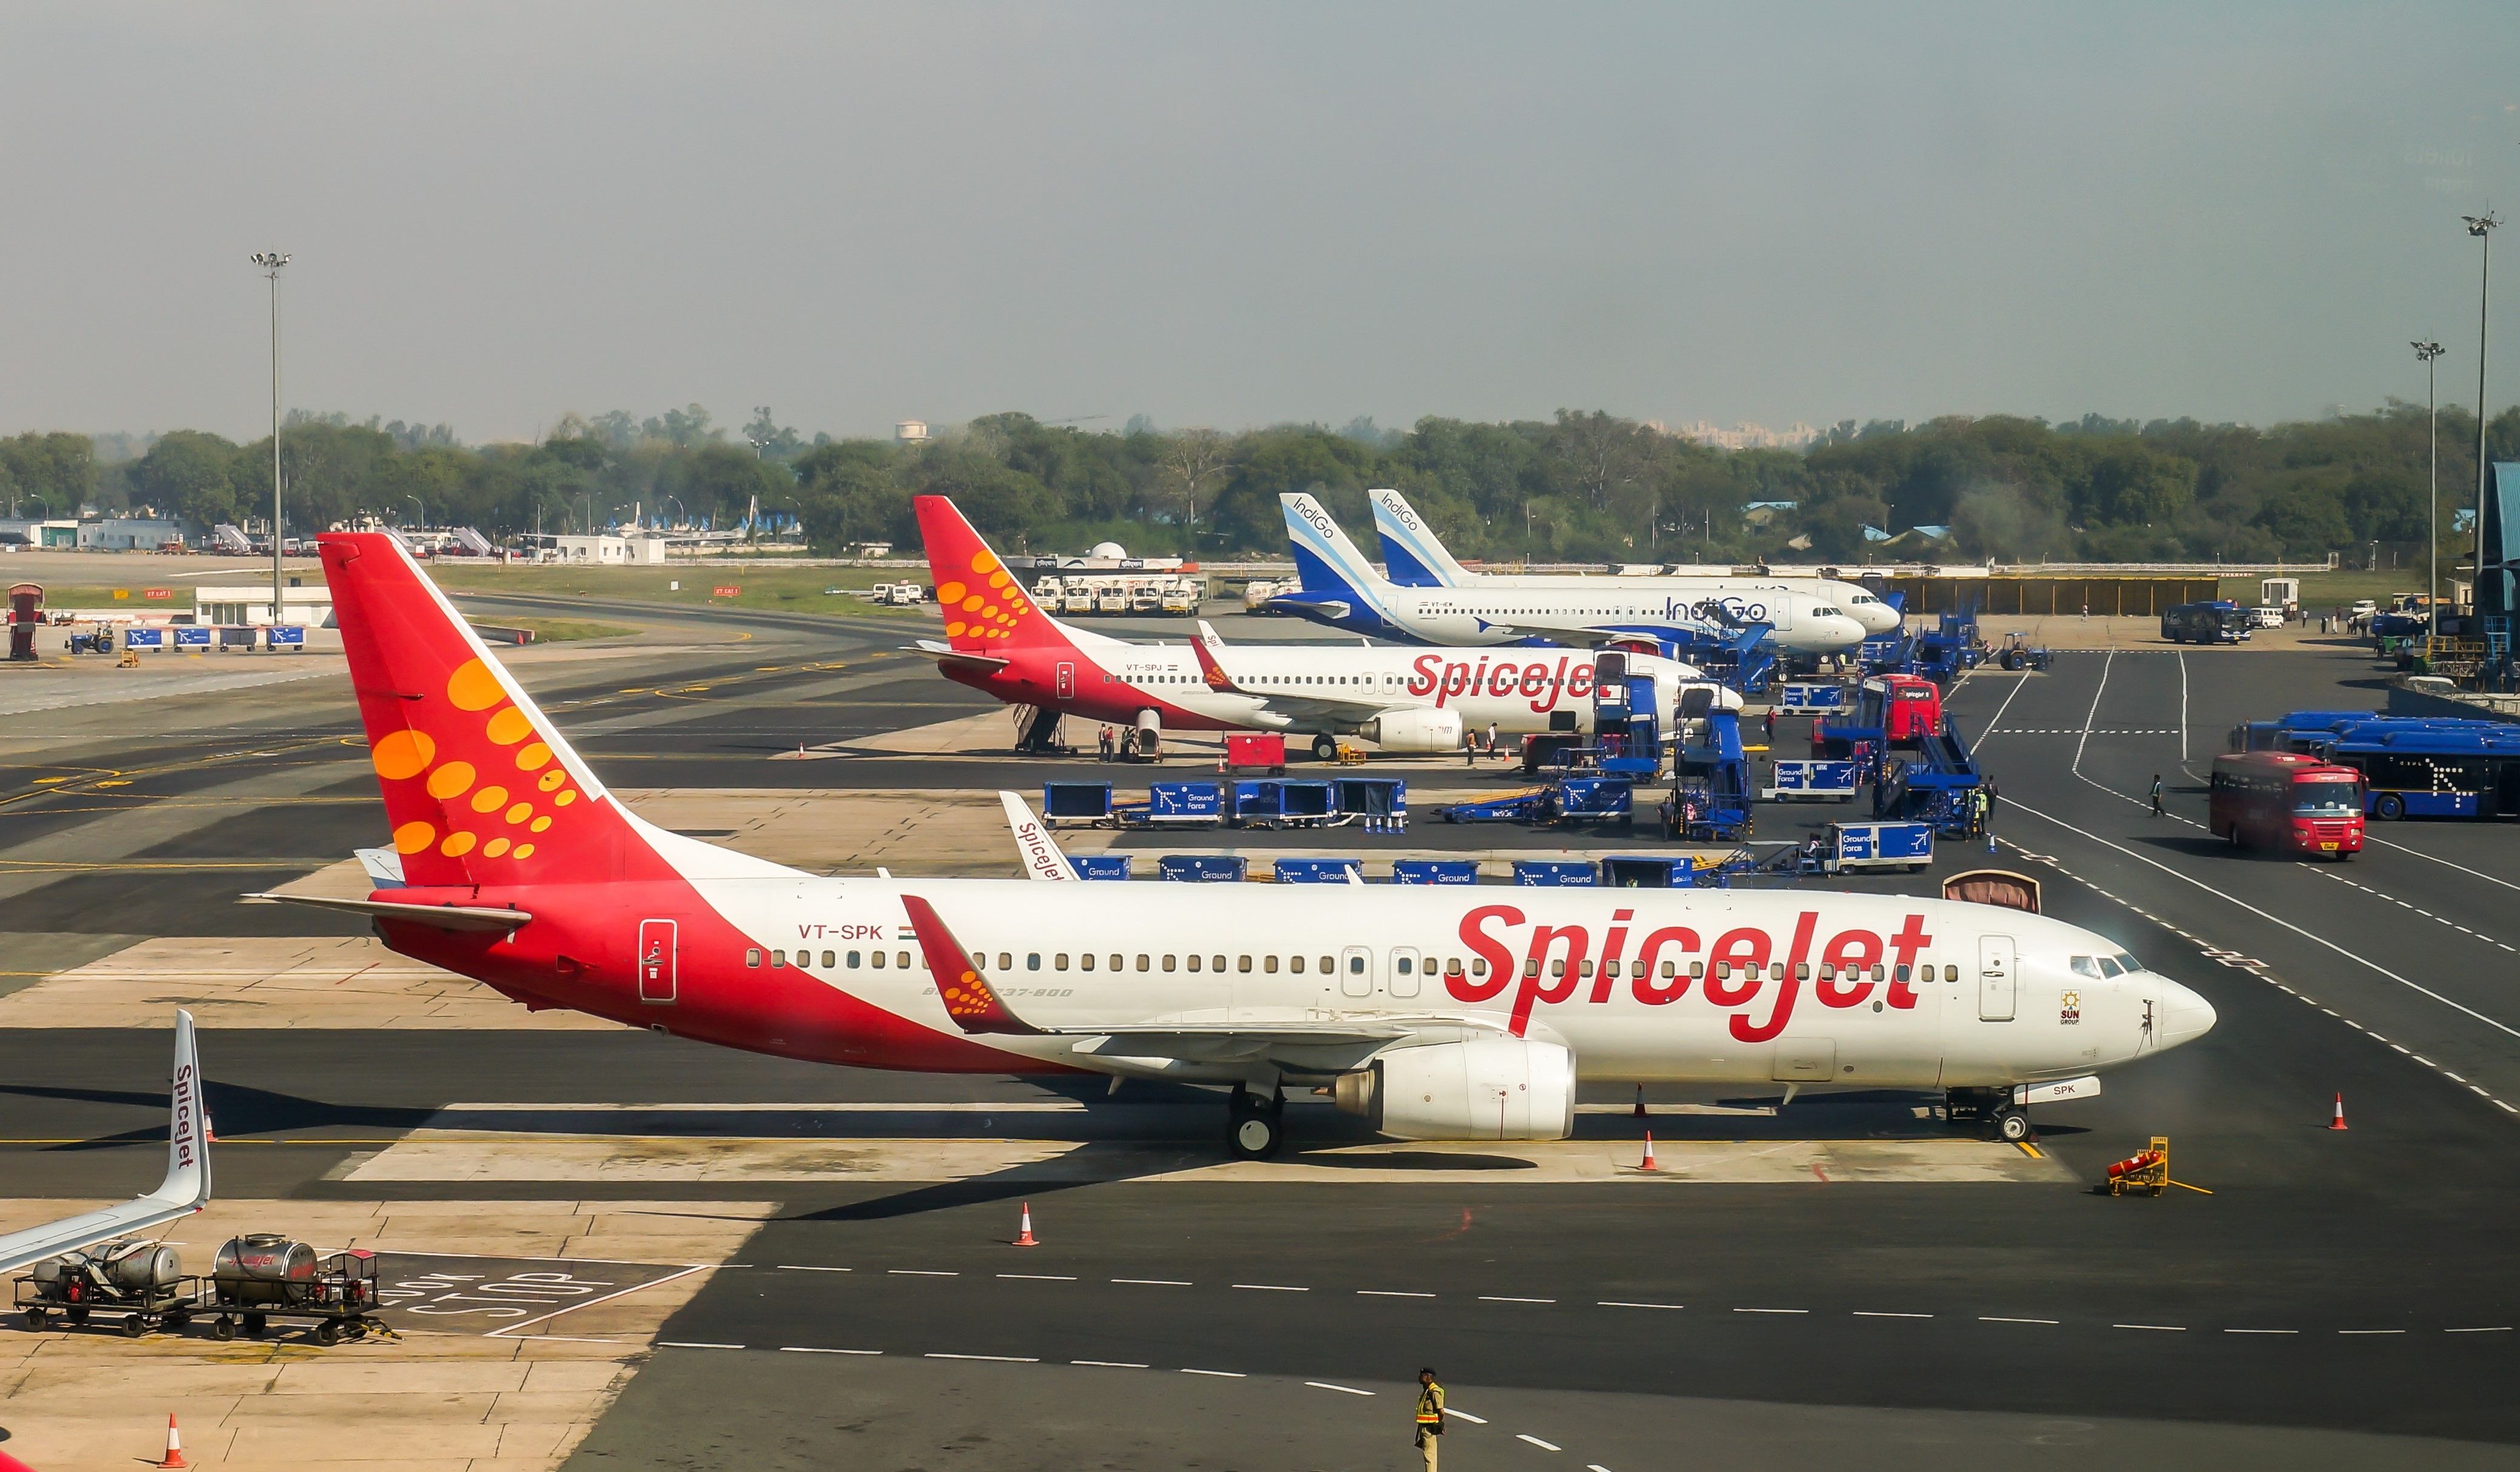 Several Airplanes parked at Delhi airport.